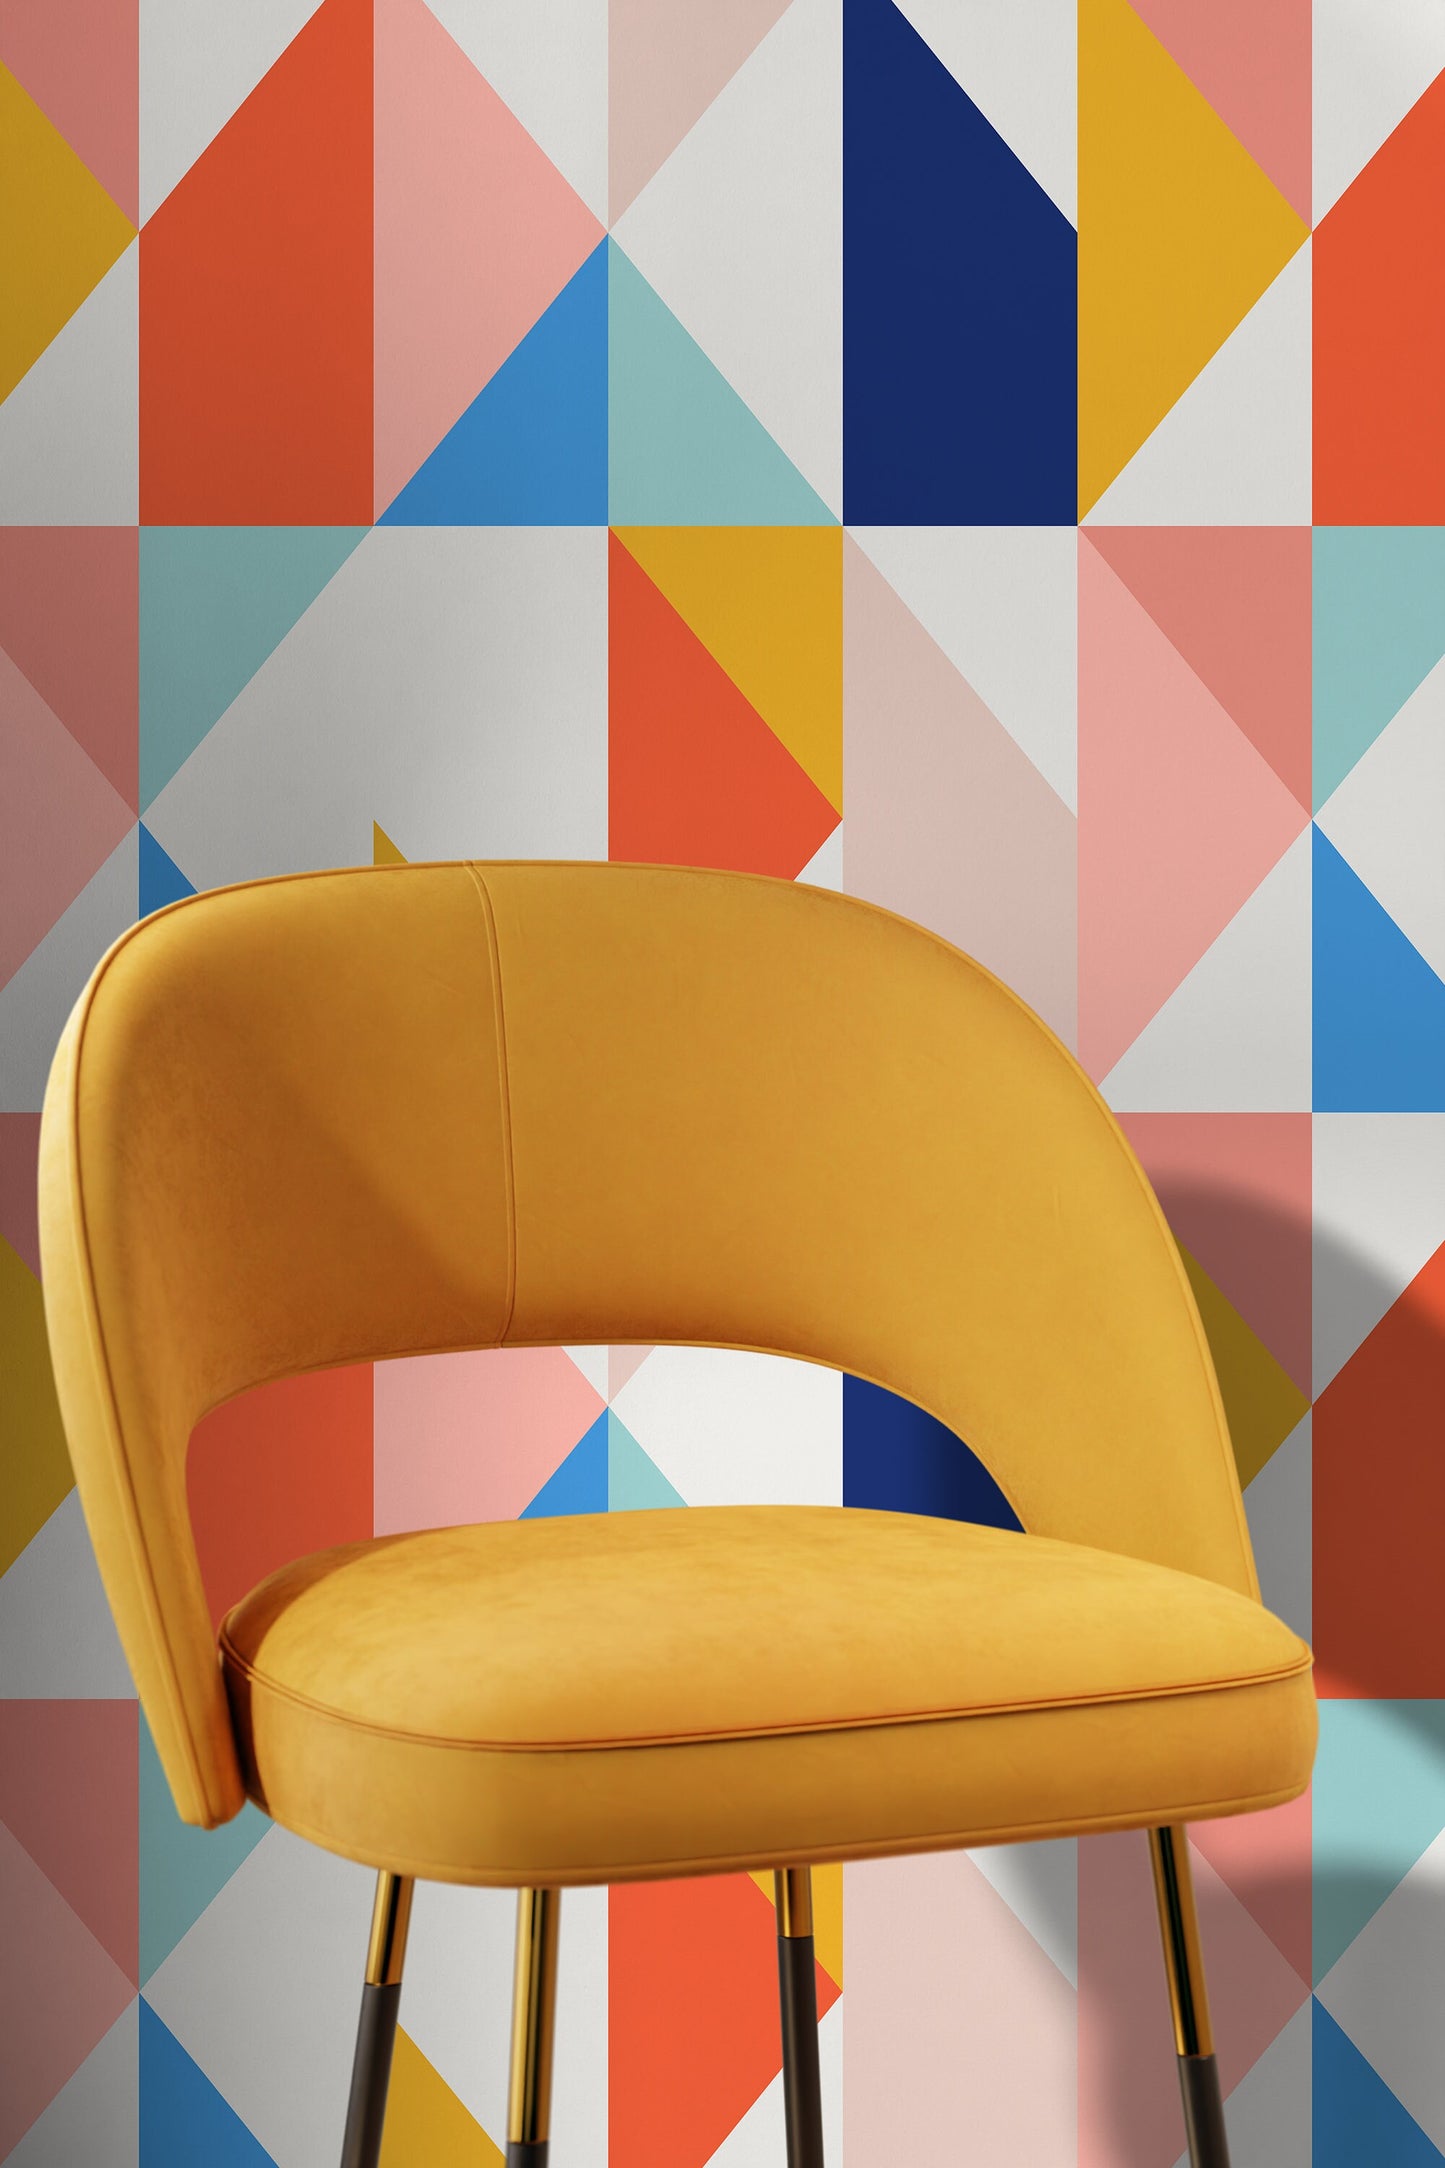 Colorful Geometric Removable Wallpaper Home Decor Wall Art Room Decor / Colorful Geometric Wallpaper - B846